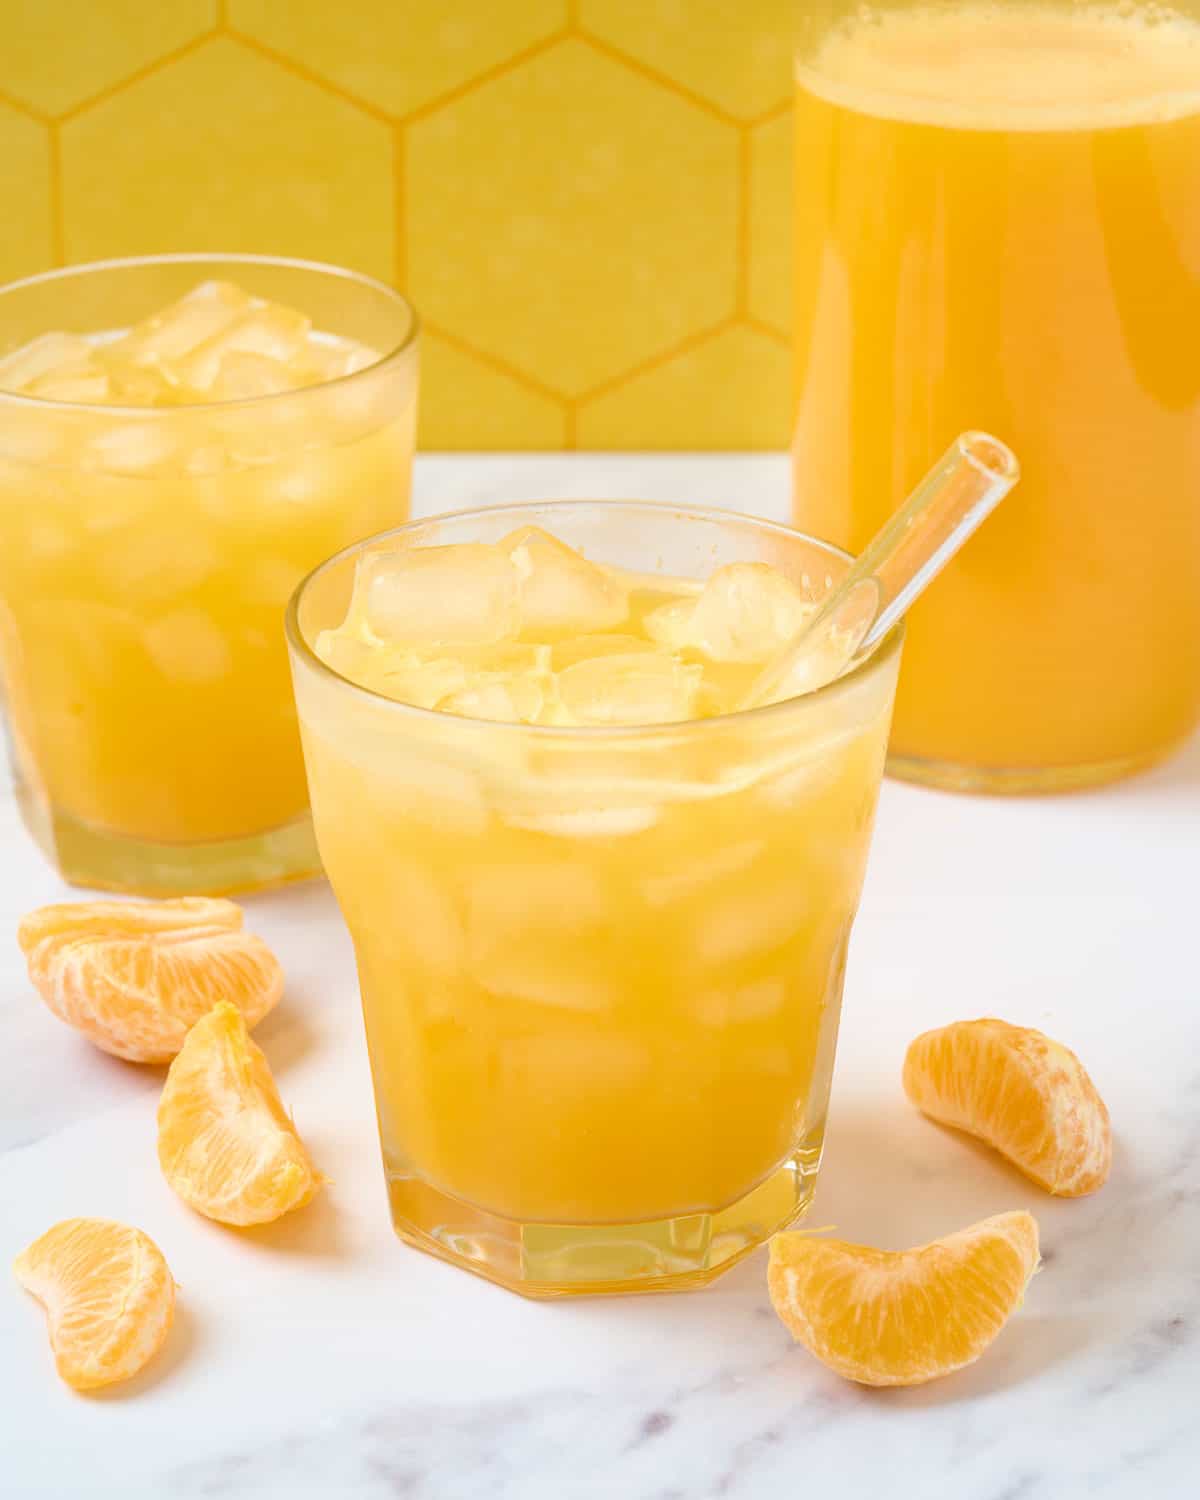 Finished mandarin juice in a large glass with a straw with a carafe of juice to the side.